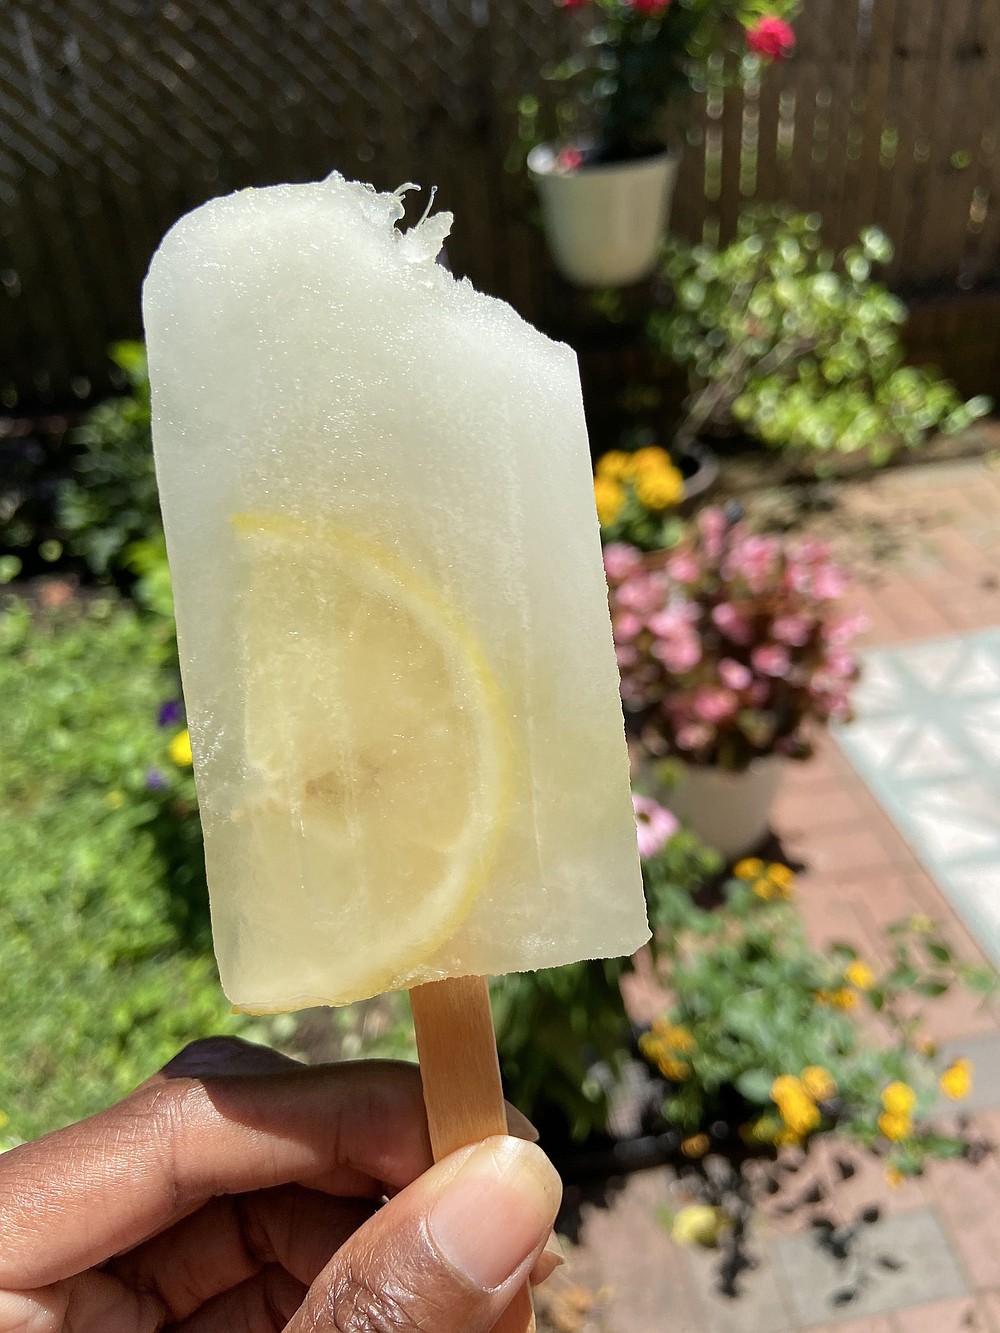 Drop lemons and limes into the molds for these homemade popsicles. (The Philadelphia Inquirer/TNS)